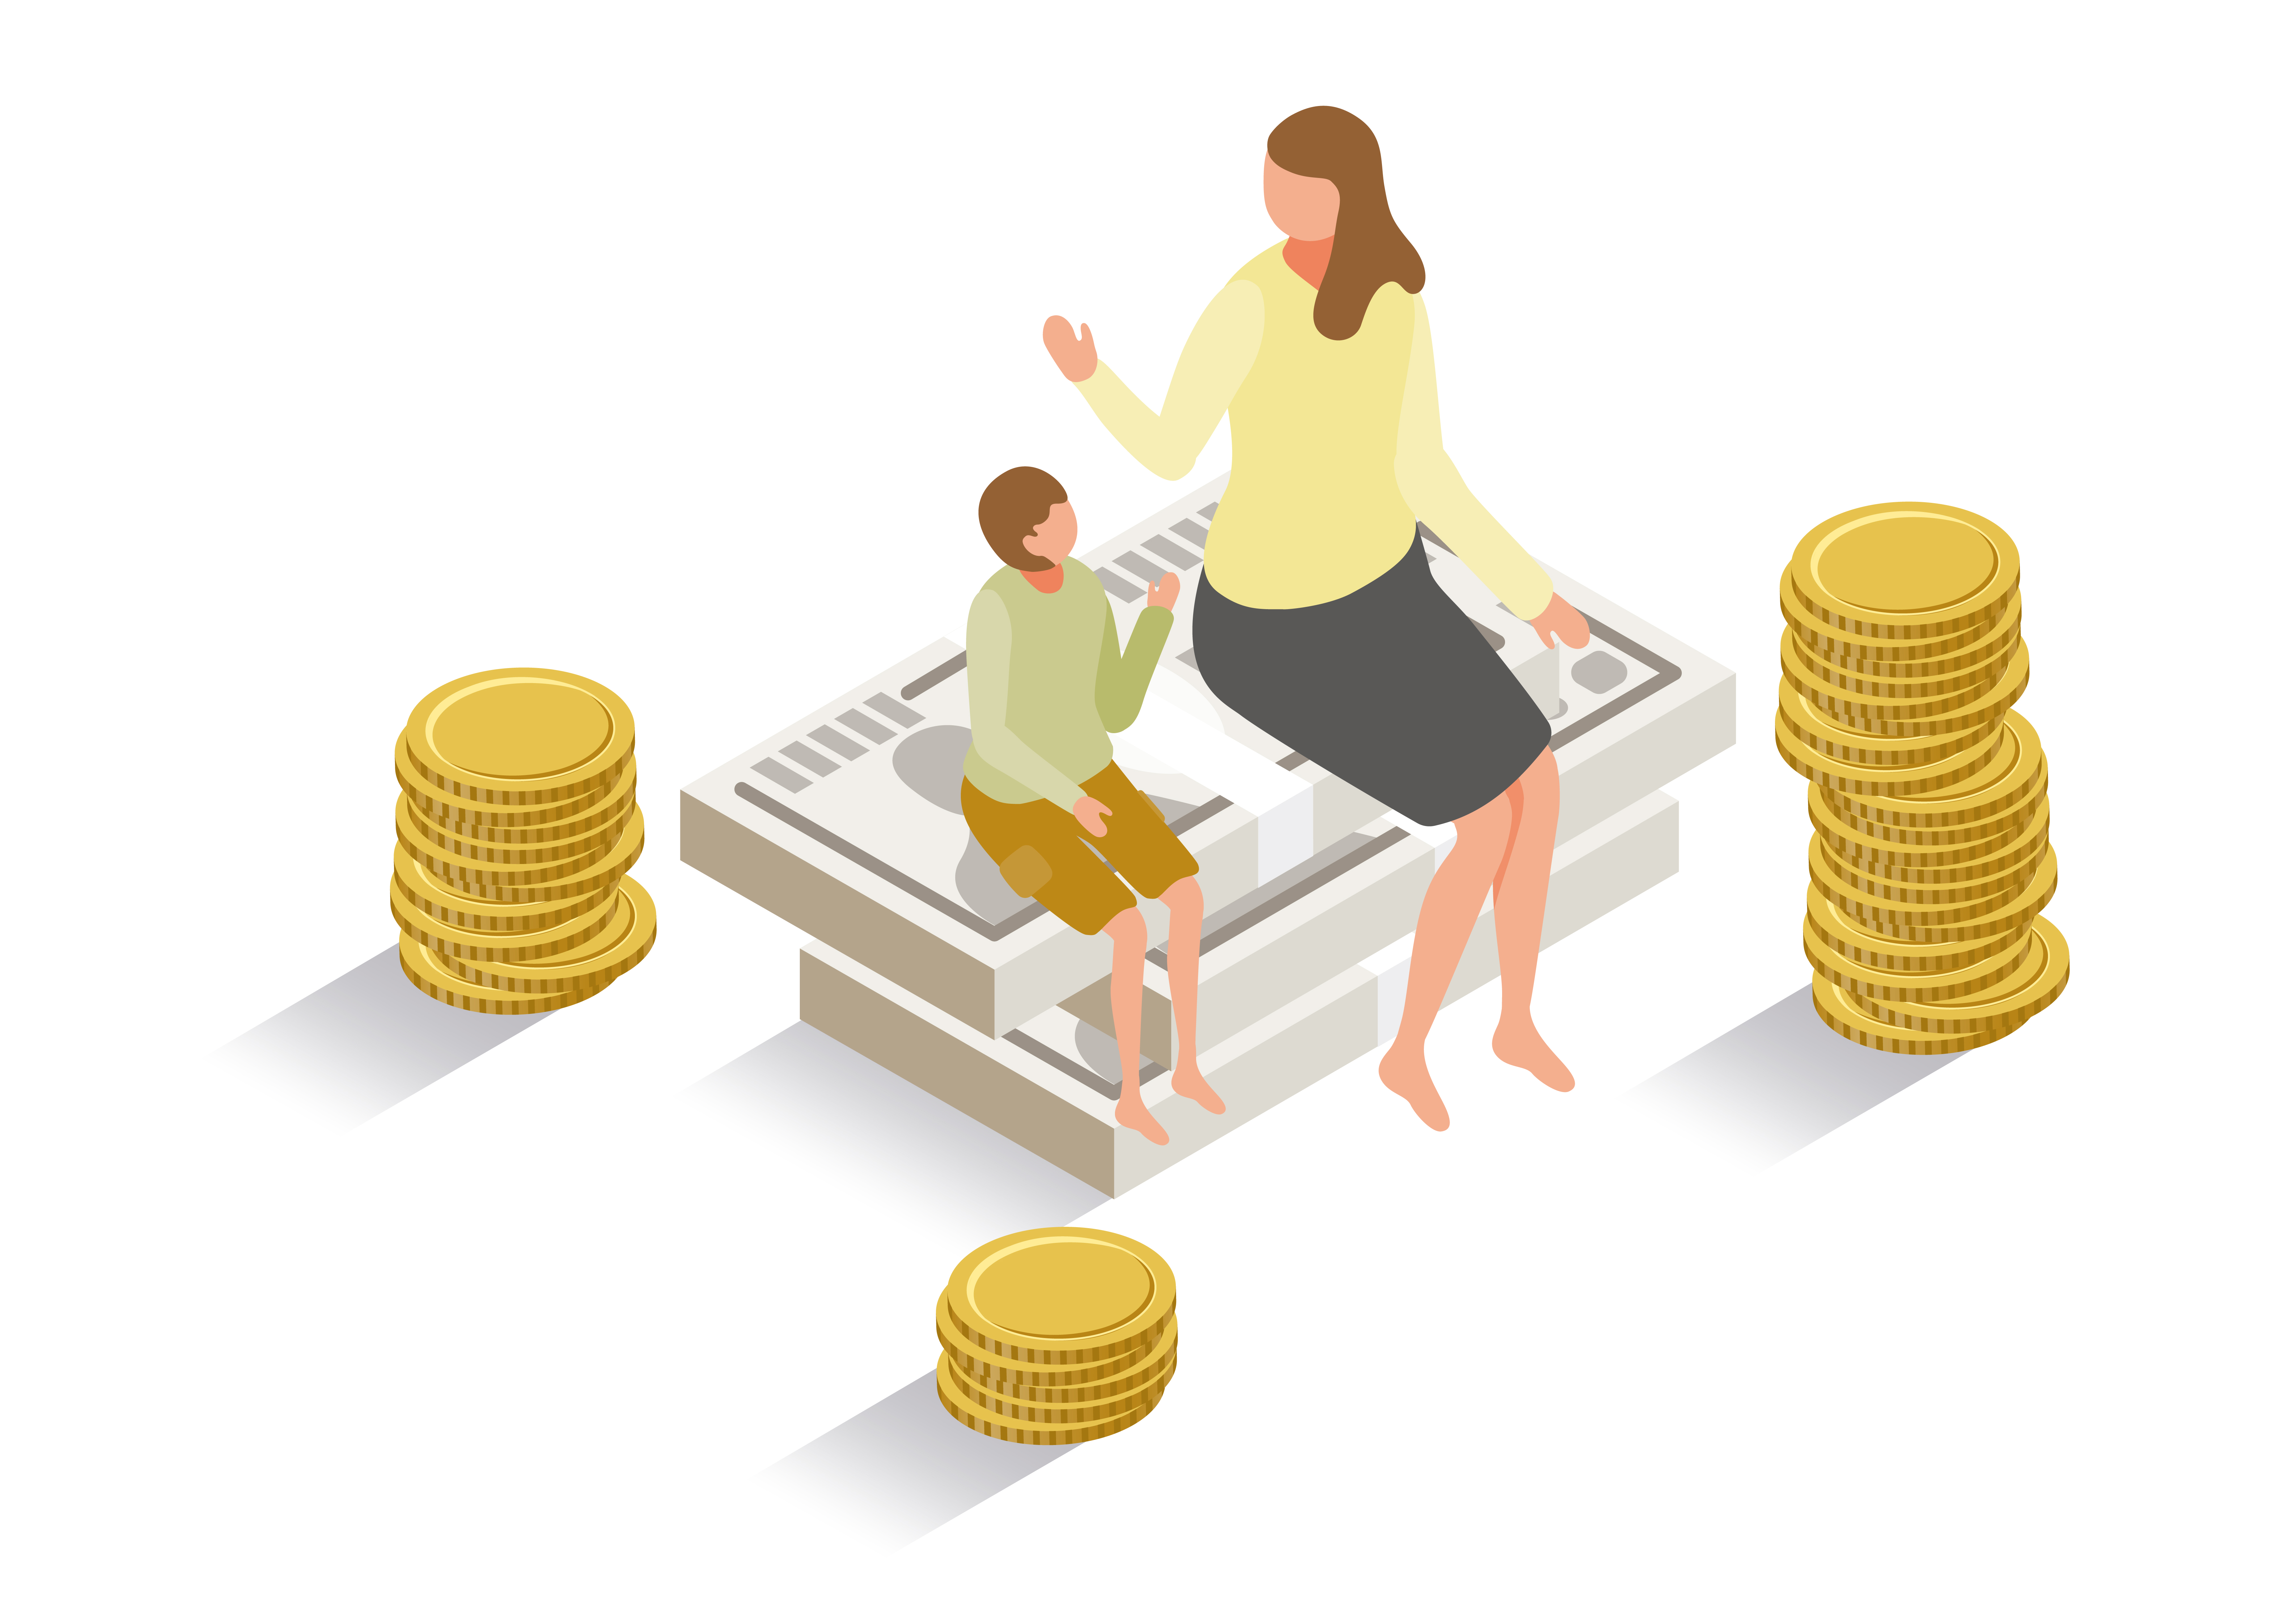 An illustrated image of a mother and child sitting on top of a stack of cash